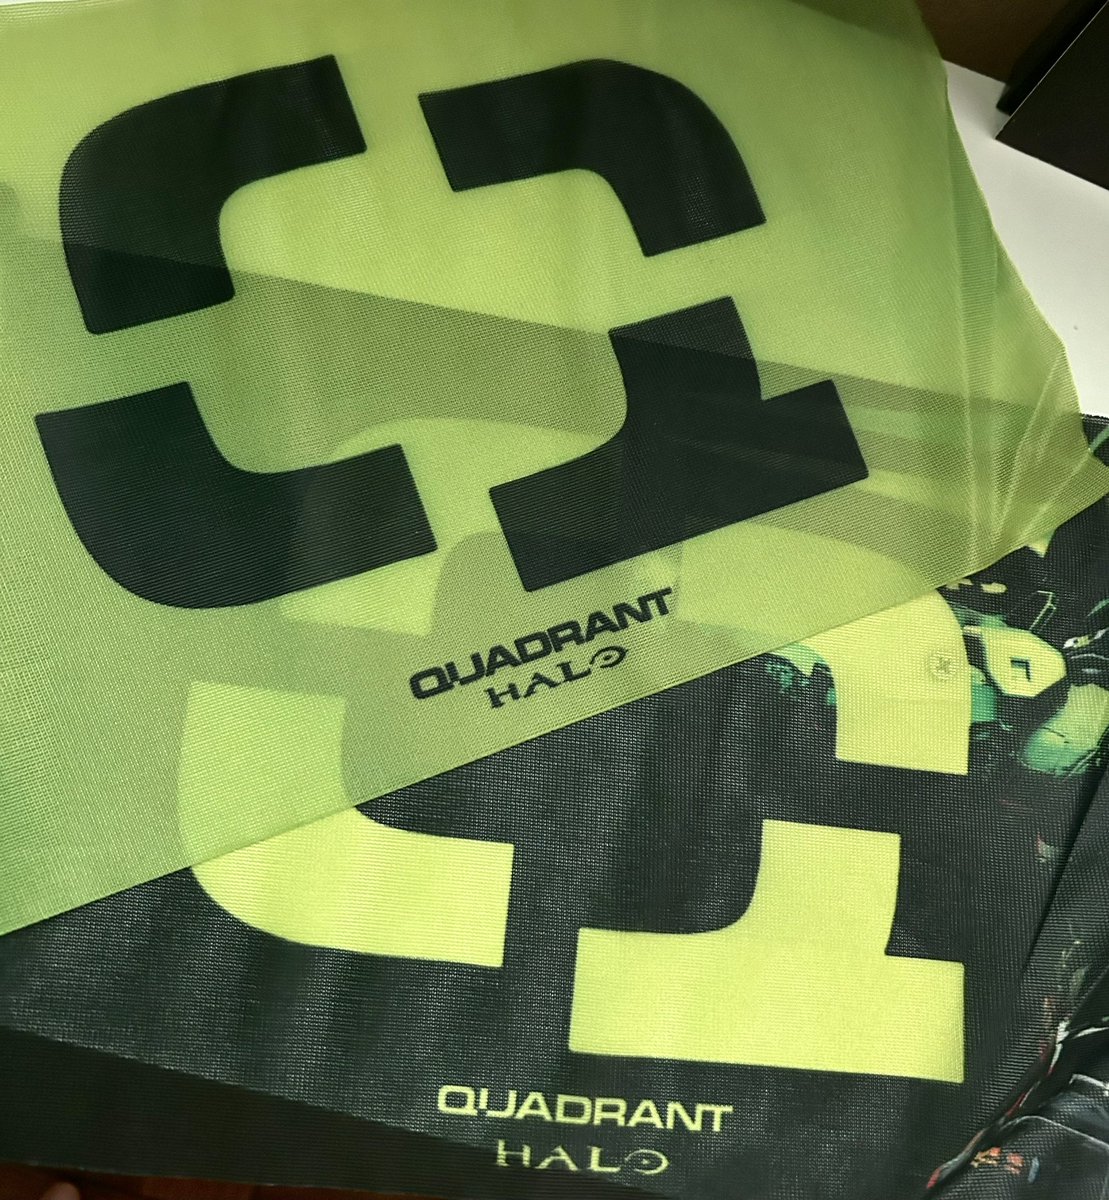 💚Mini Quadrant giveaway💚 I made these mini hand flags to wave for Quad at LANs, and I have a couple extra I want to giveaway to people who would like them! Only two rules: -Like this post -Be a quadrant fan Open to everyone, and I can ship outside NA if needed!